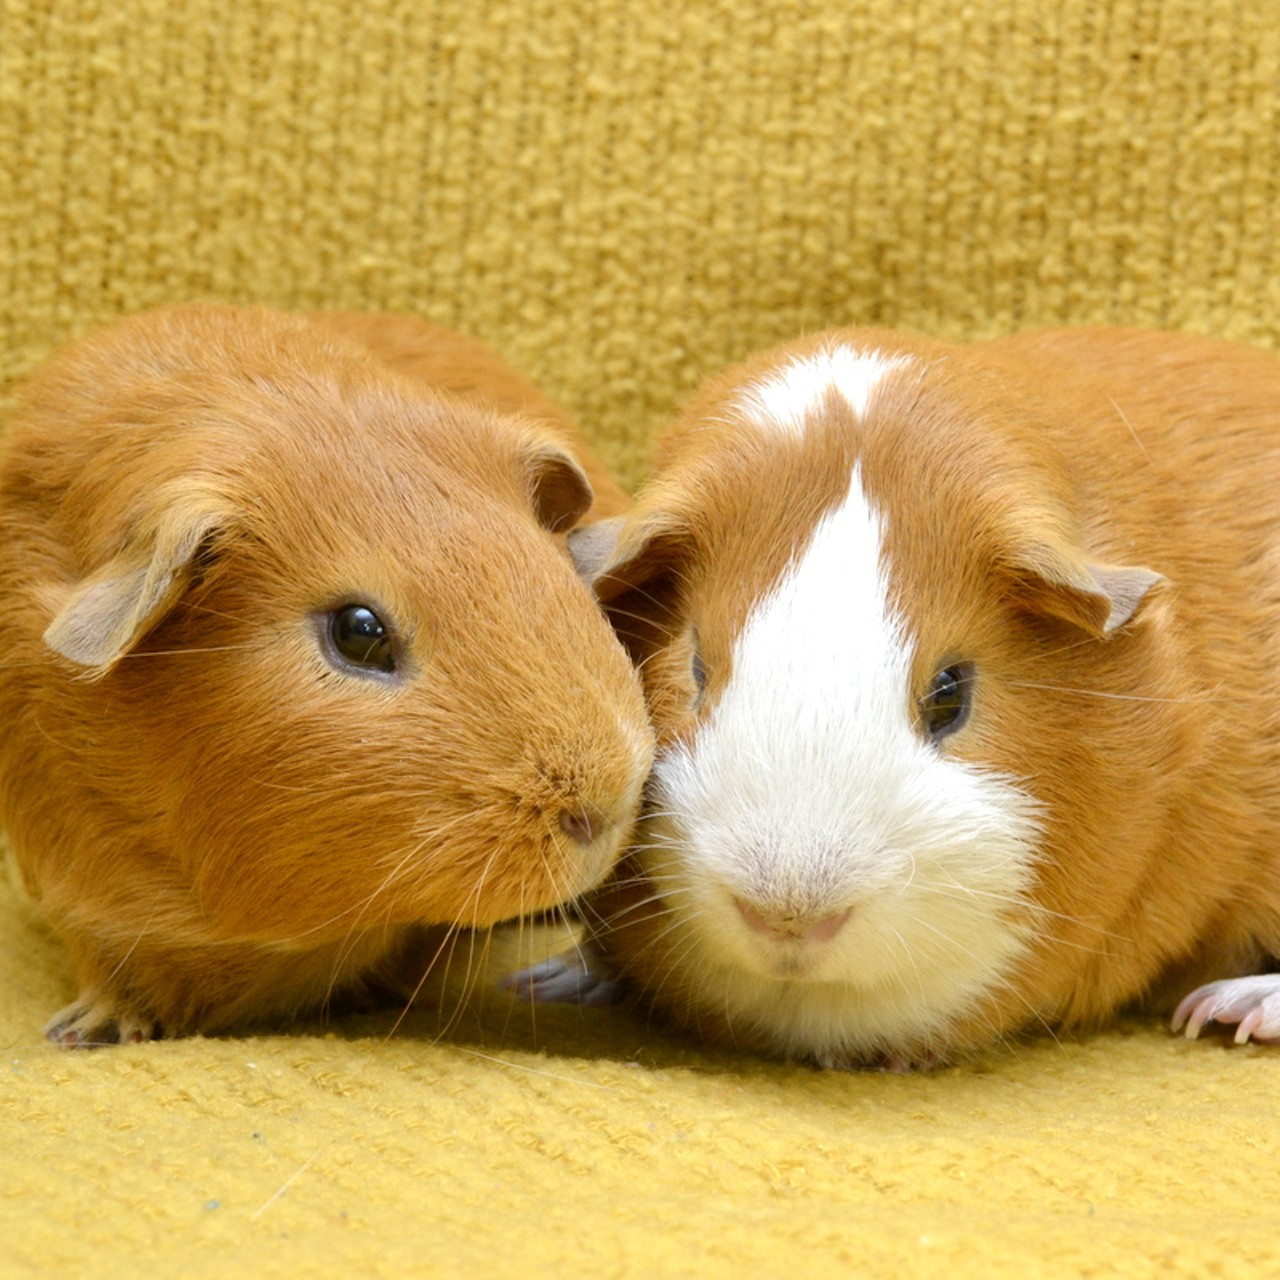 NAMES:  Neo  and  Harry 
GENDER: Male
BREED: American guinea pig
AGE: 1 year, 5 months
SPECIAL CONSIDERATIONS: Bonded pair, meaning they must be adopted together
REASON I CAME TO MHS: Owner surrender
LOCATION: Berman Center for Animal Care in Westland
ID NUMBER: 868575 and 868577, respectively